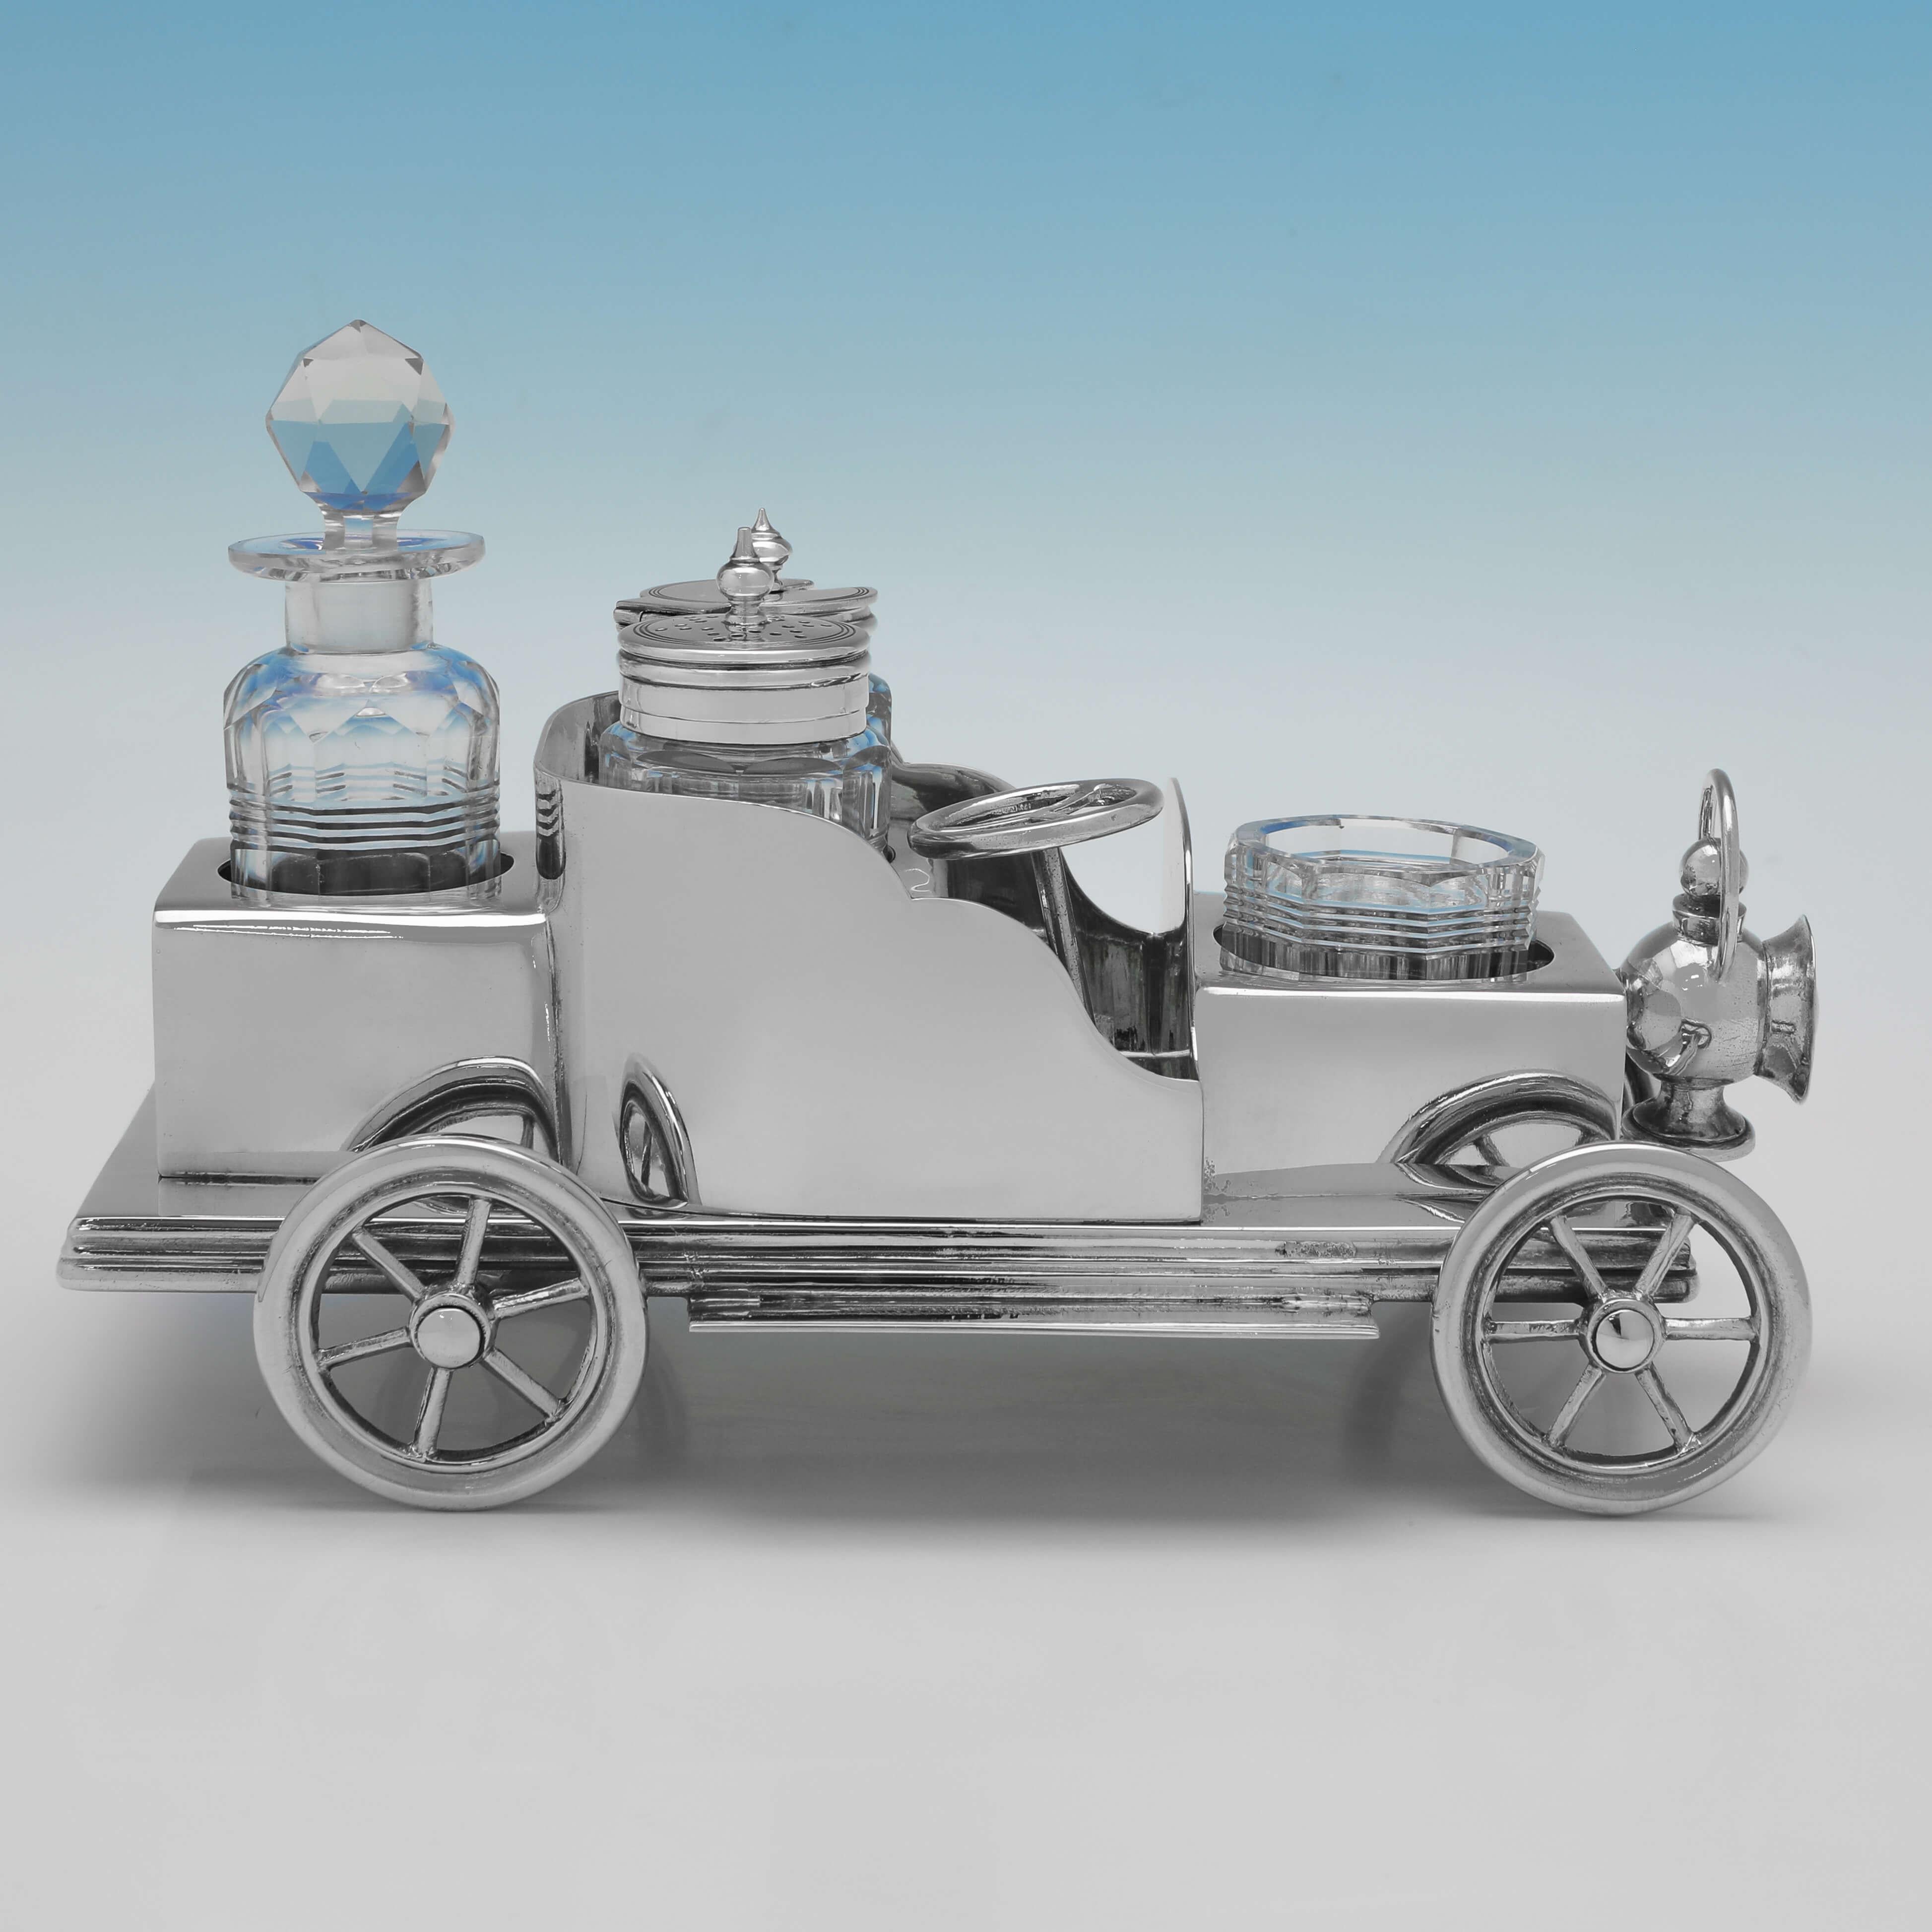 Carrying old silver plate marks for 1905 by Frank Cobb & Co., this charming, Antique, Silver Plate Condiment Set, is in the form of a car, and features 5 containers for various condiments. The condiment set measures 4.75